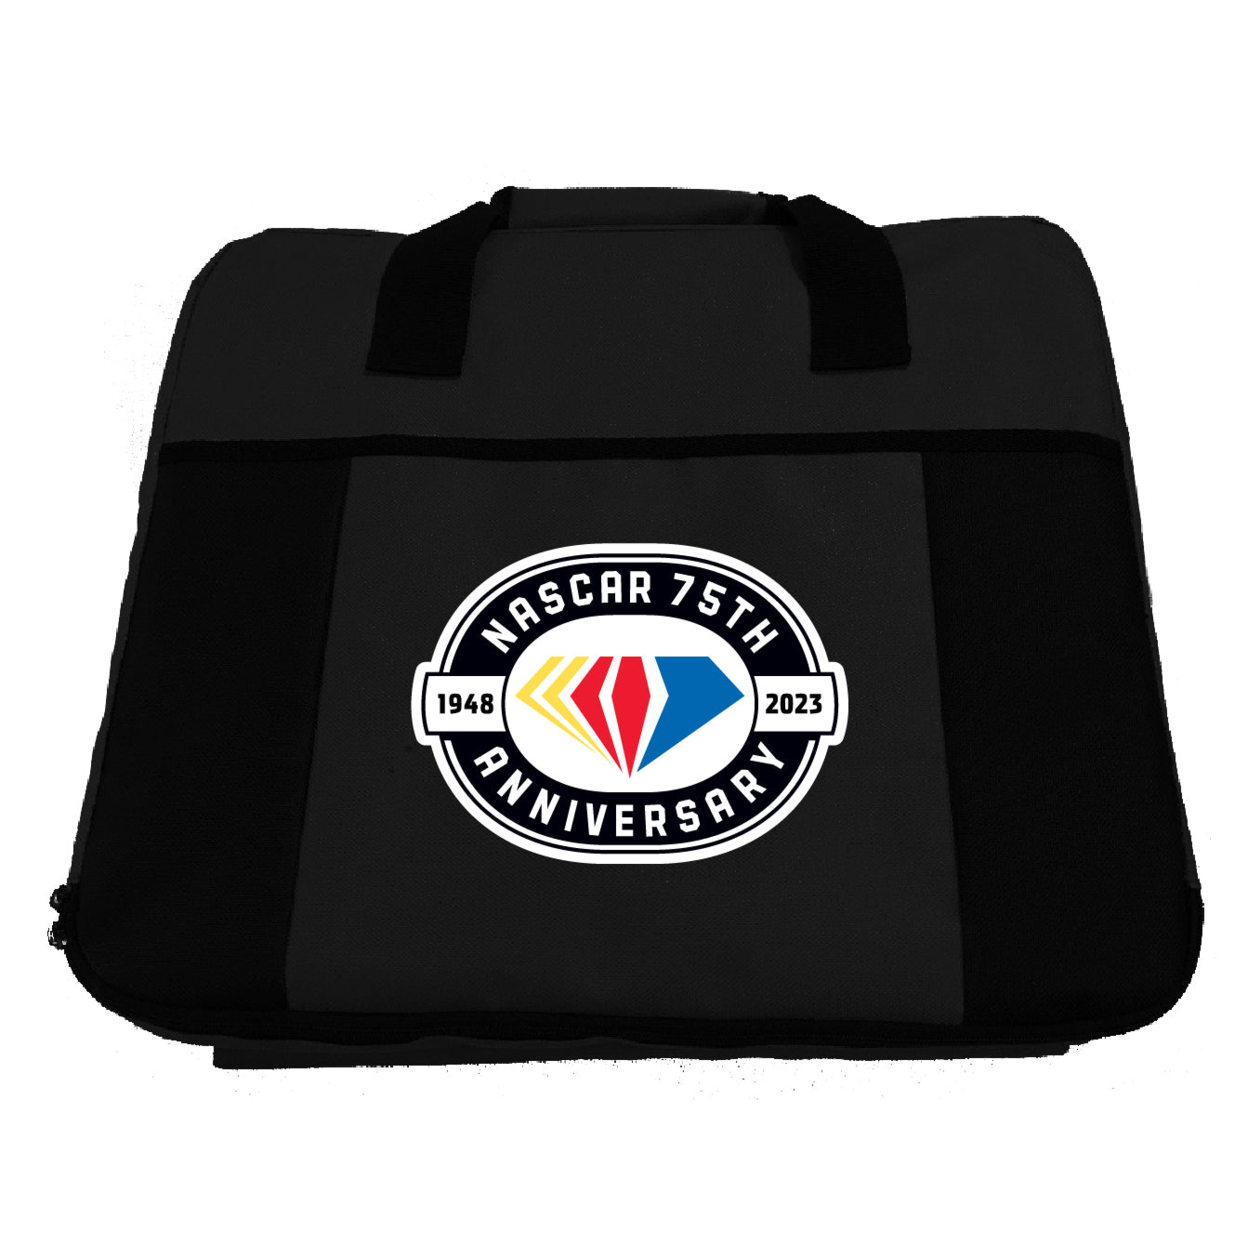 NASCAR 75 Year Anniversary Officially Licensed Deluxe Seat Cushion - Black